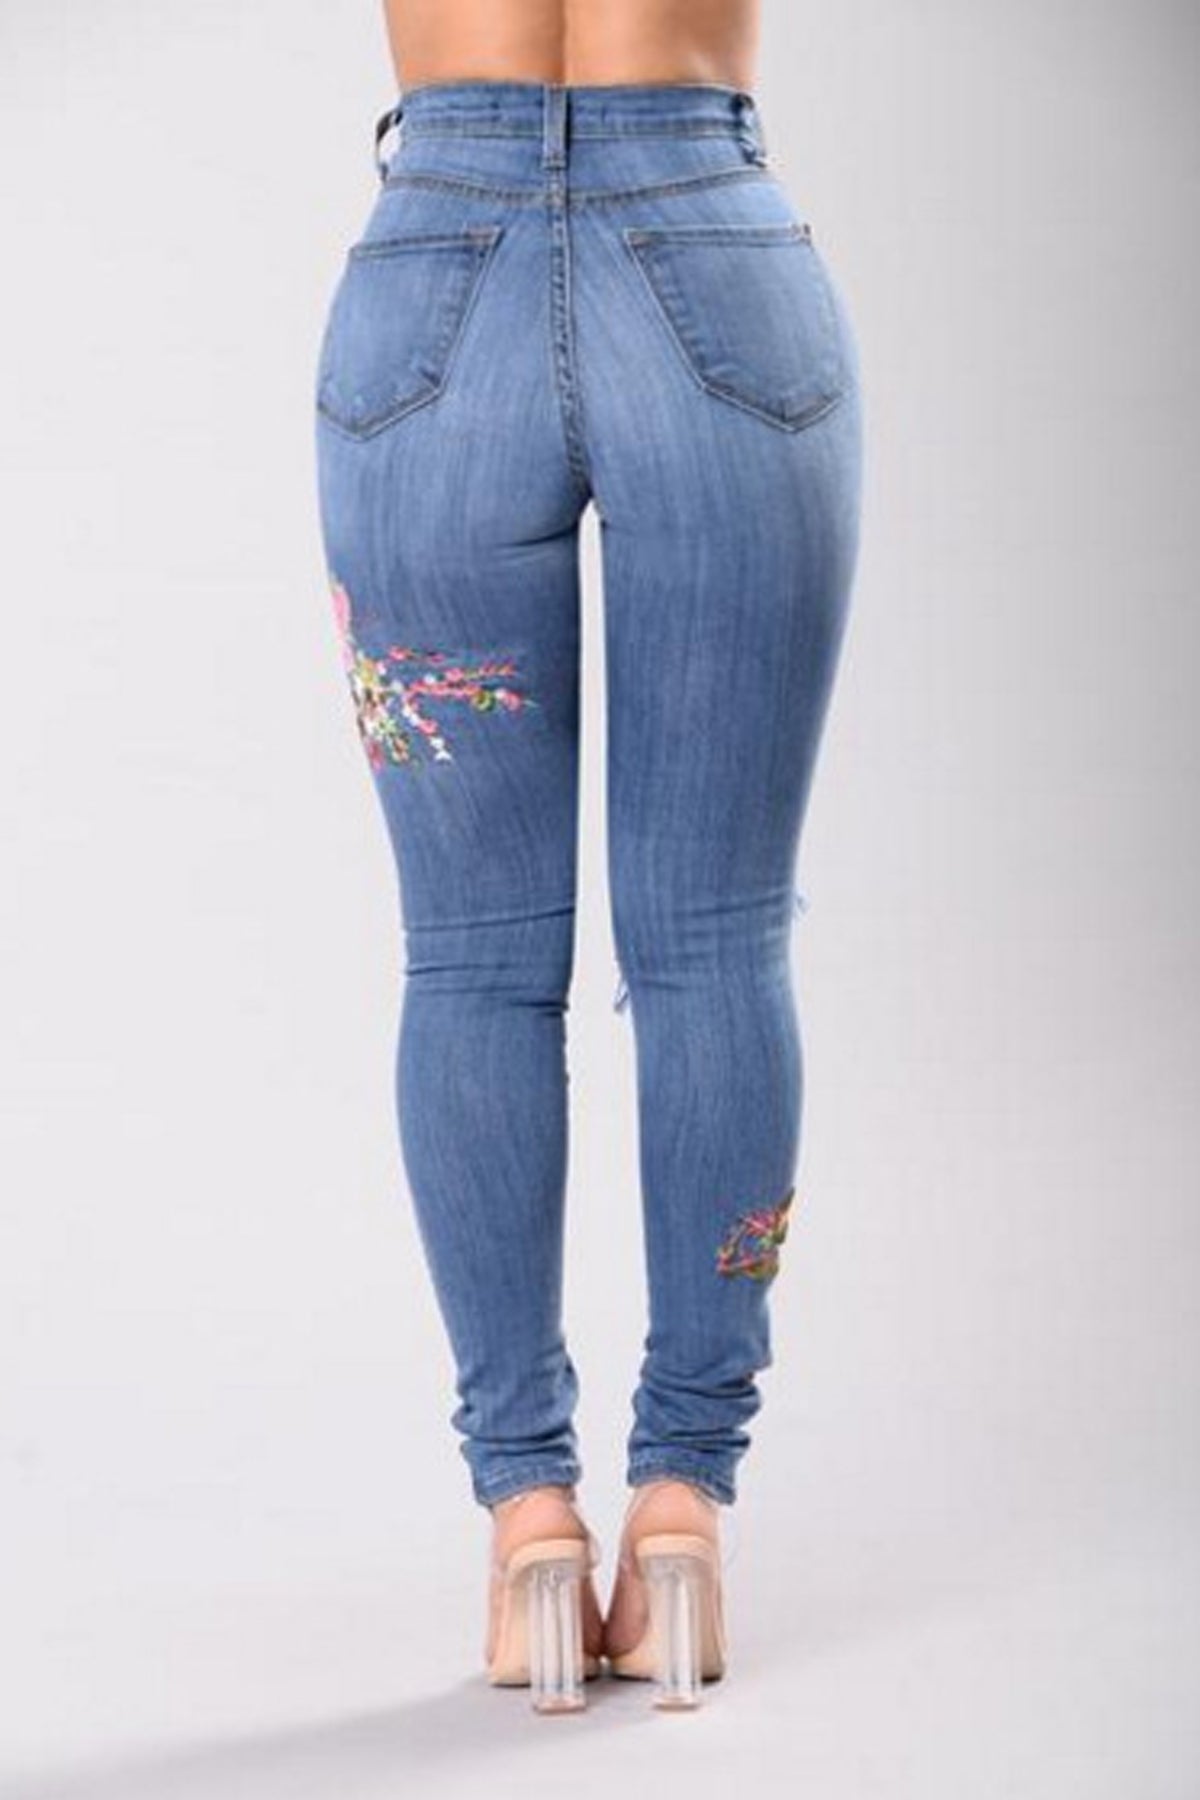 Flower Embroidery Middle Waist Cut Out Holes Long Skinny Jeans